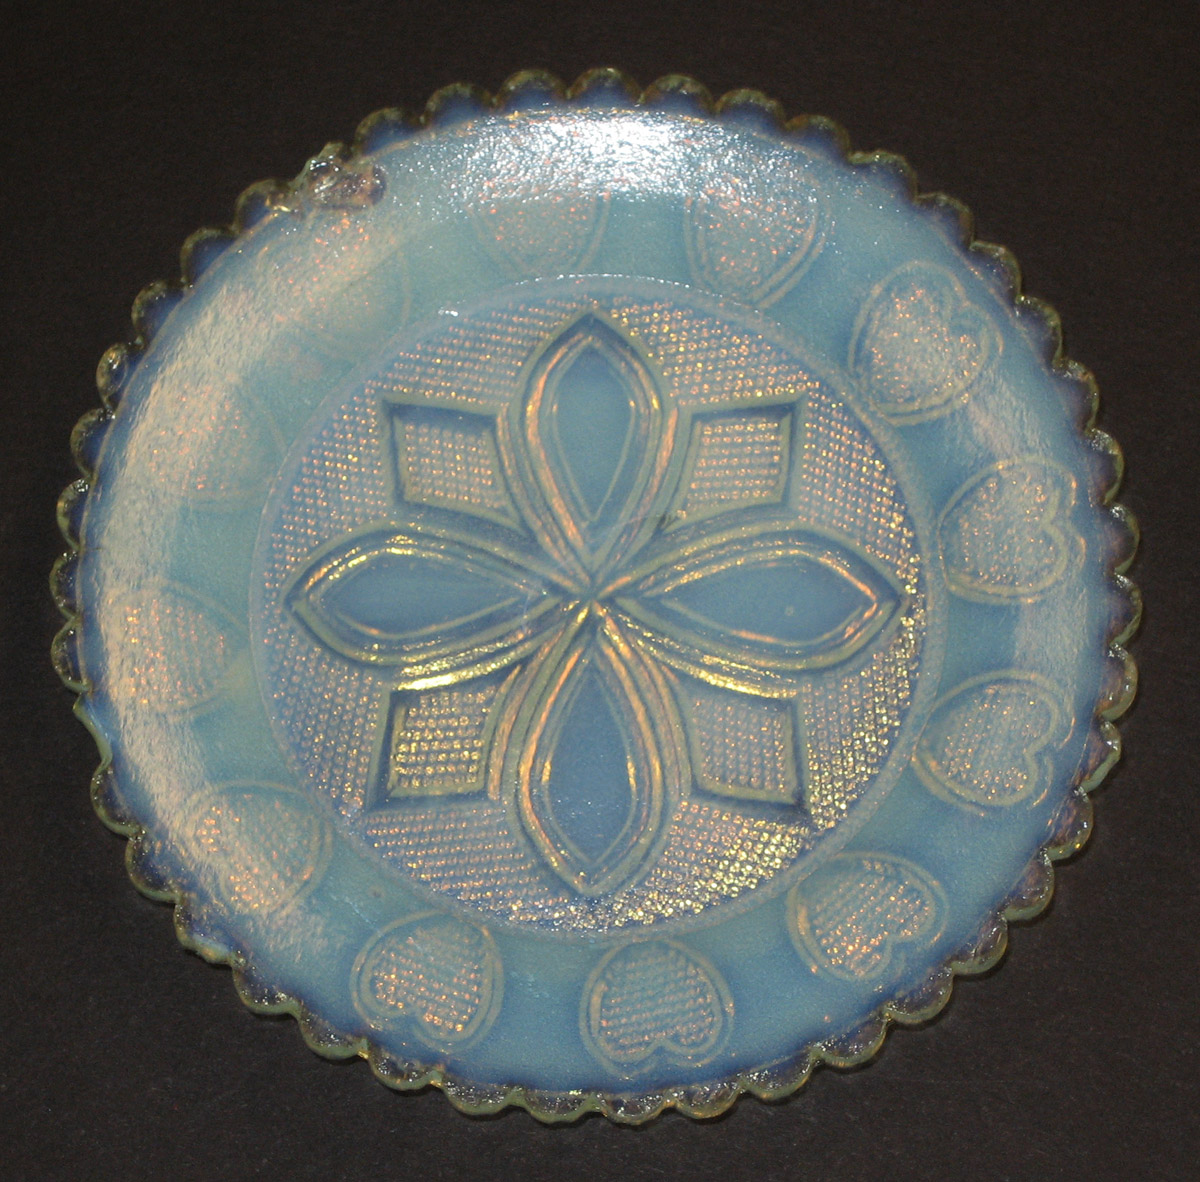 1994.0026 Glass cup plate